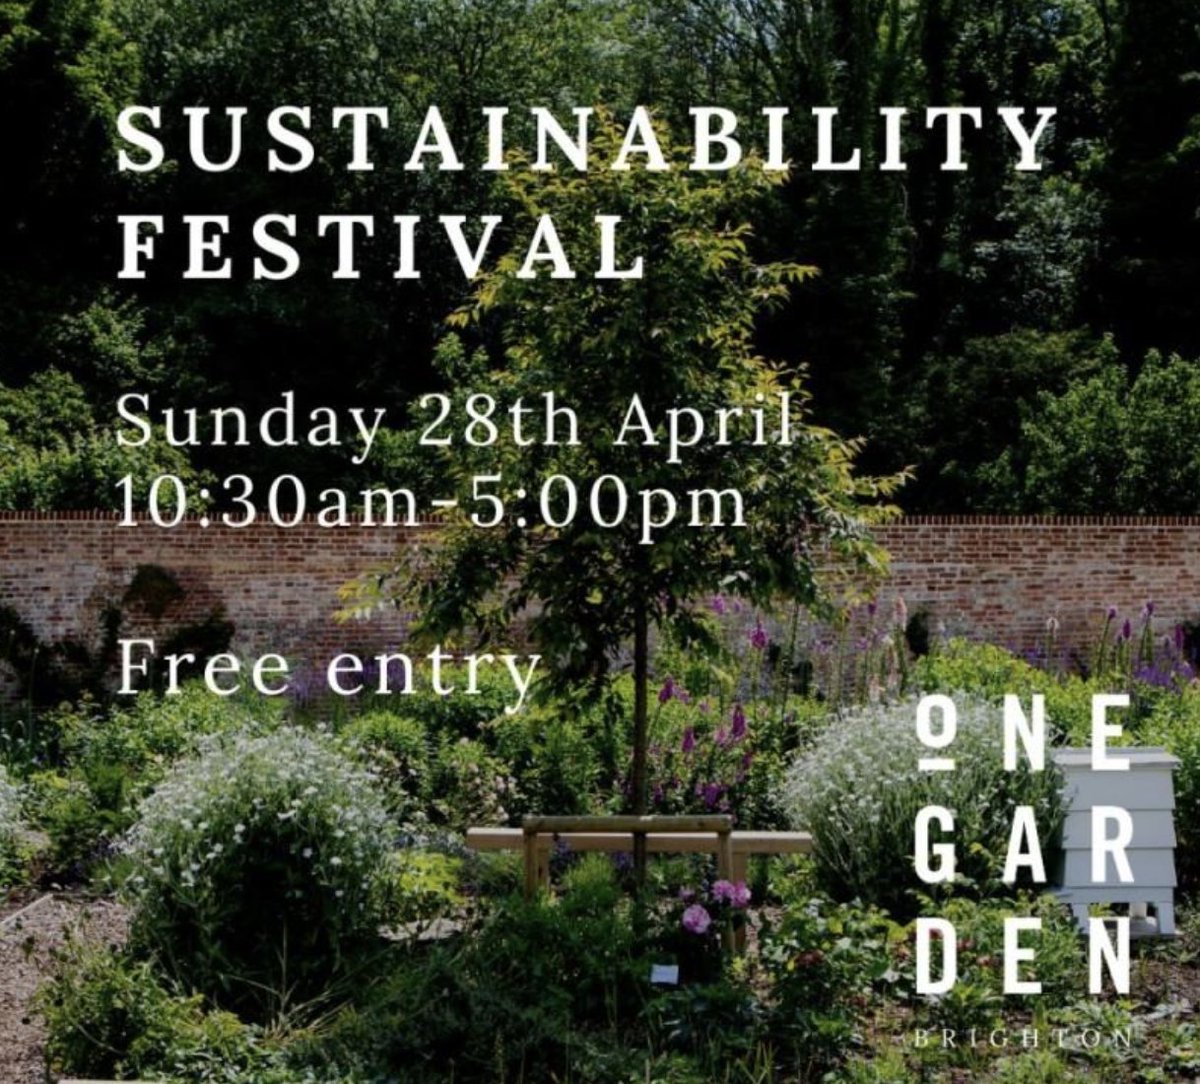 Head over to Stanmer Park on Sunday for the #sustainabilityfestival Lots of interesting discussion around #textiles & what we can do to solve the crisis of #wastecolonialism and #workerexploitation that the fast fashion industry promotes. See you there! Free tickets on eventbrite